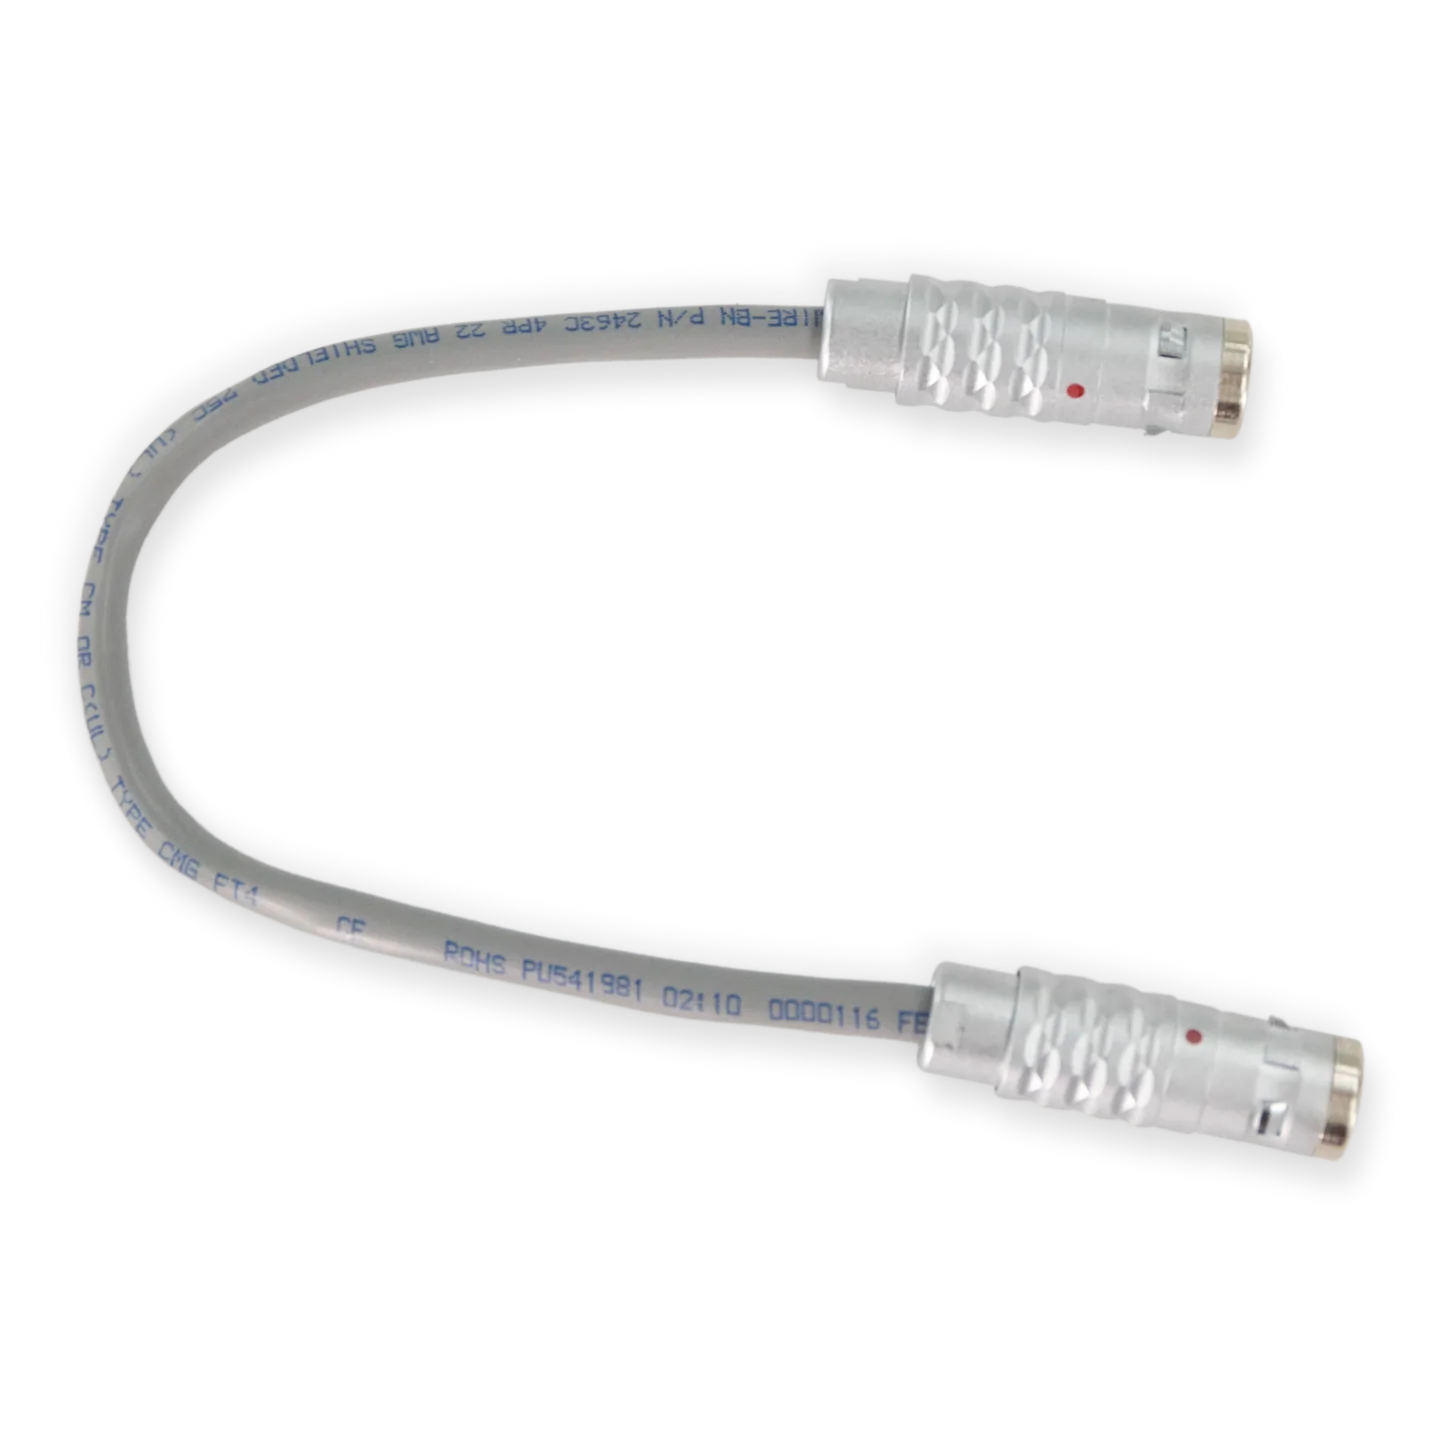 Lift Data Cable ODU (8 PIN TO 8 PIN)